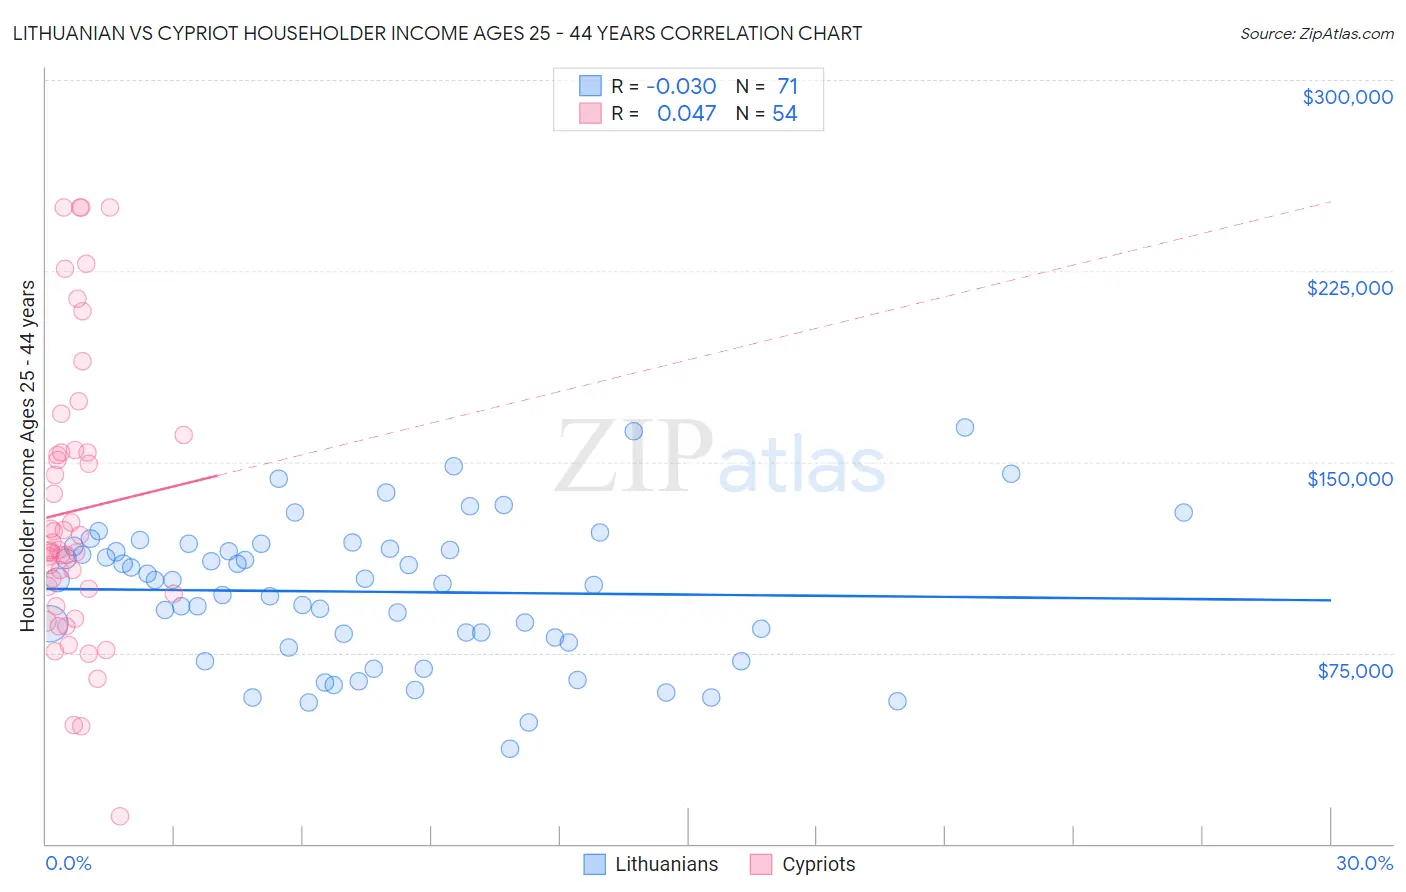 Lithuanian vs Cypriot Householder Income Ages 25 - 44 years